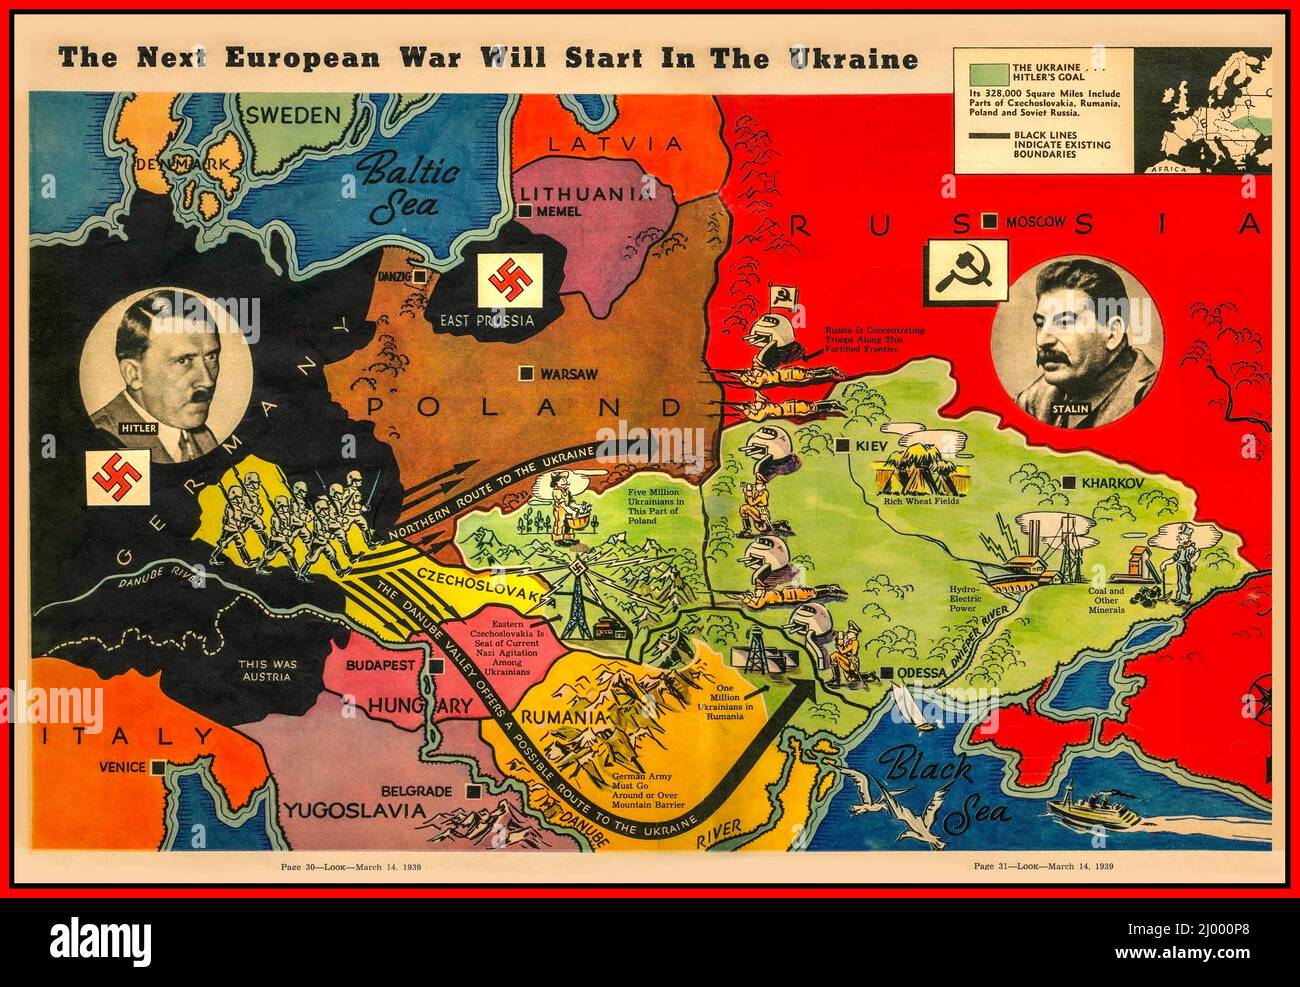 UKRAINE 1939 Vintage propaganda map of Ukraine, Eastern Europe, Baltic States, RUSSIA USSR, with portraits of Stalin and Hitler. Prophetic title from ' LOOK ' magazine double page spread titled ' THE NEXT EUROPEAN WAR WILL START IN THE UKRAINE' March 14th 1939 With explanatory captions regarding potential targets for conflict. Stock Photo